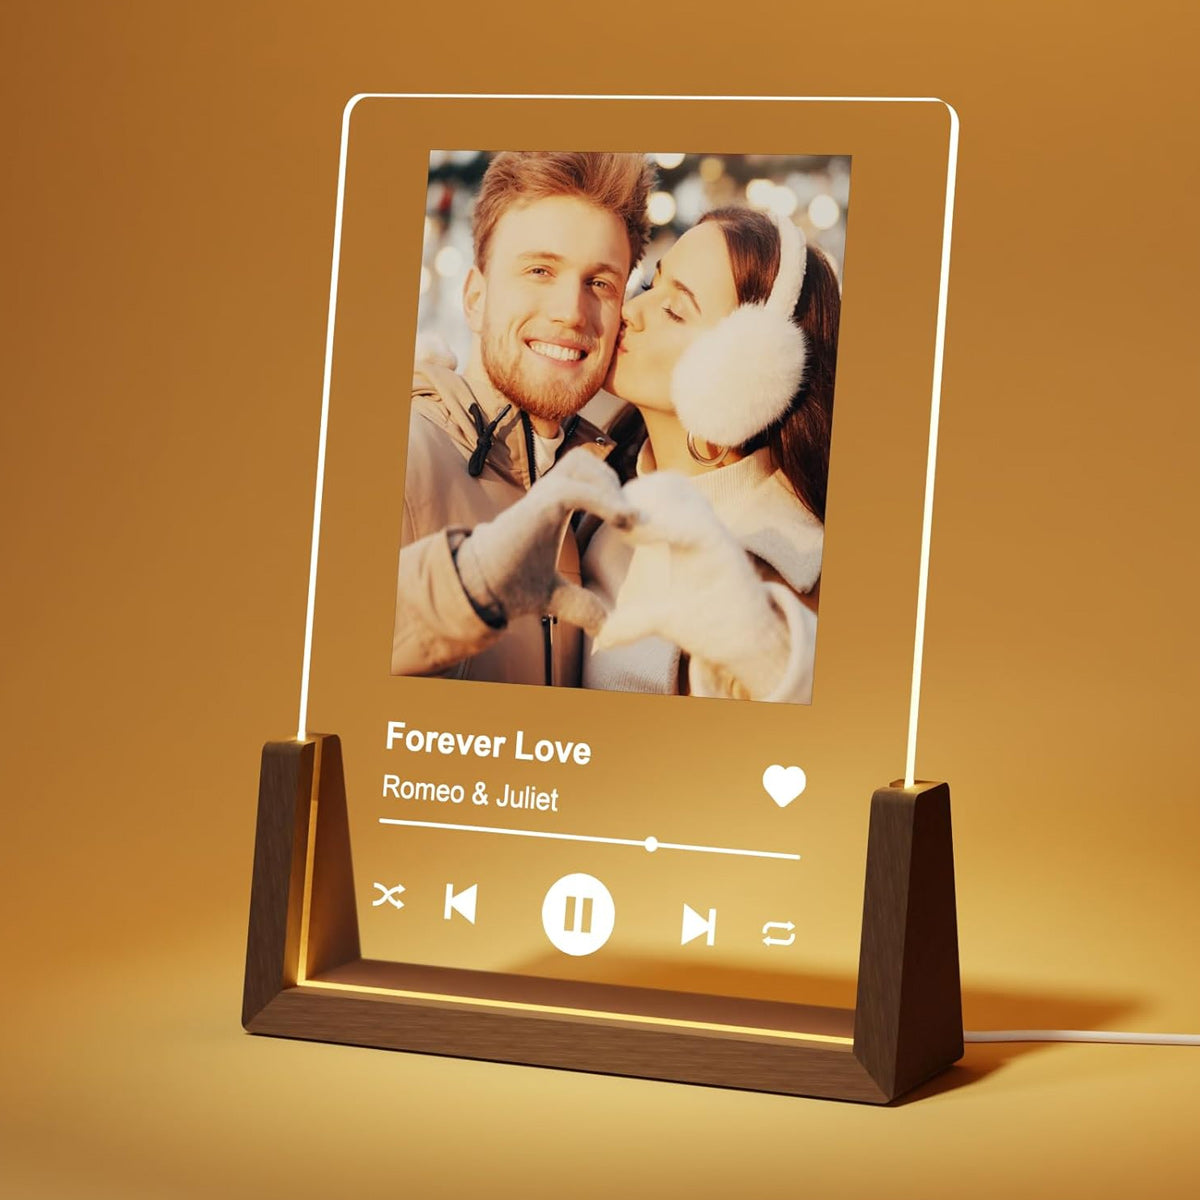 NEONIP-Personalized Night Light with Spotify Acrylic Plaque, Customized Gifts with Photos for Boyfriend Girlfriend